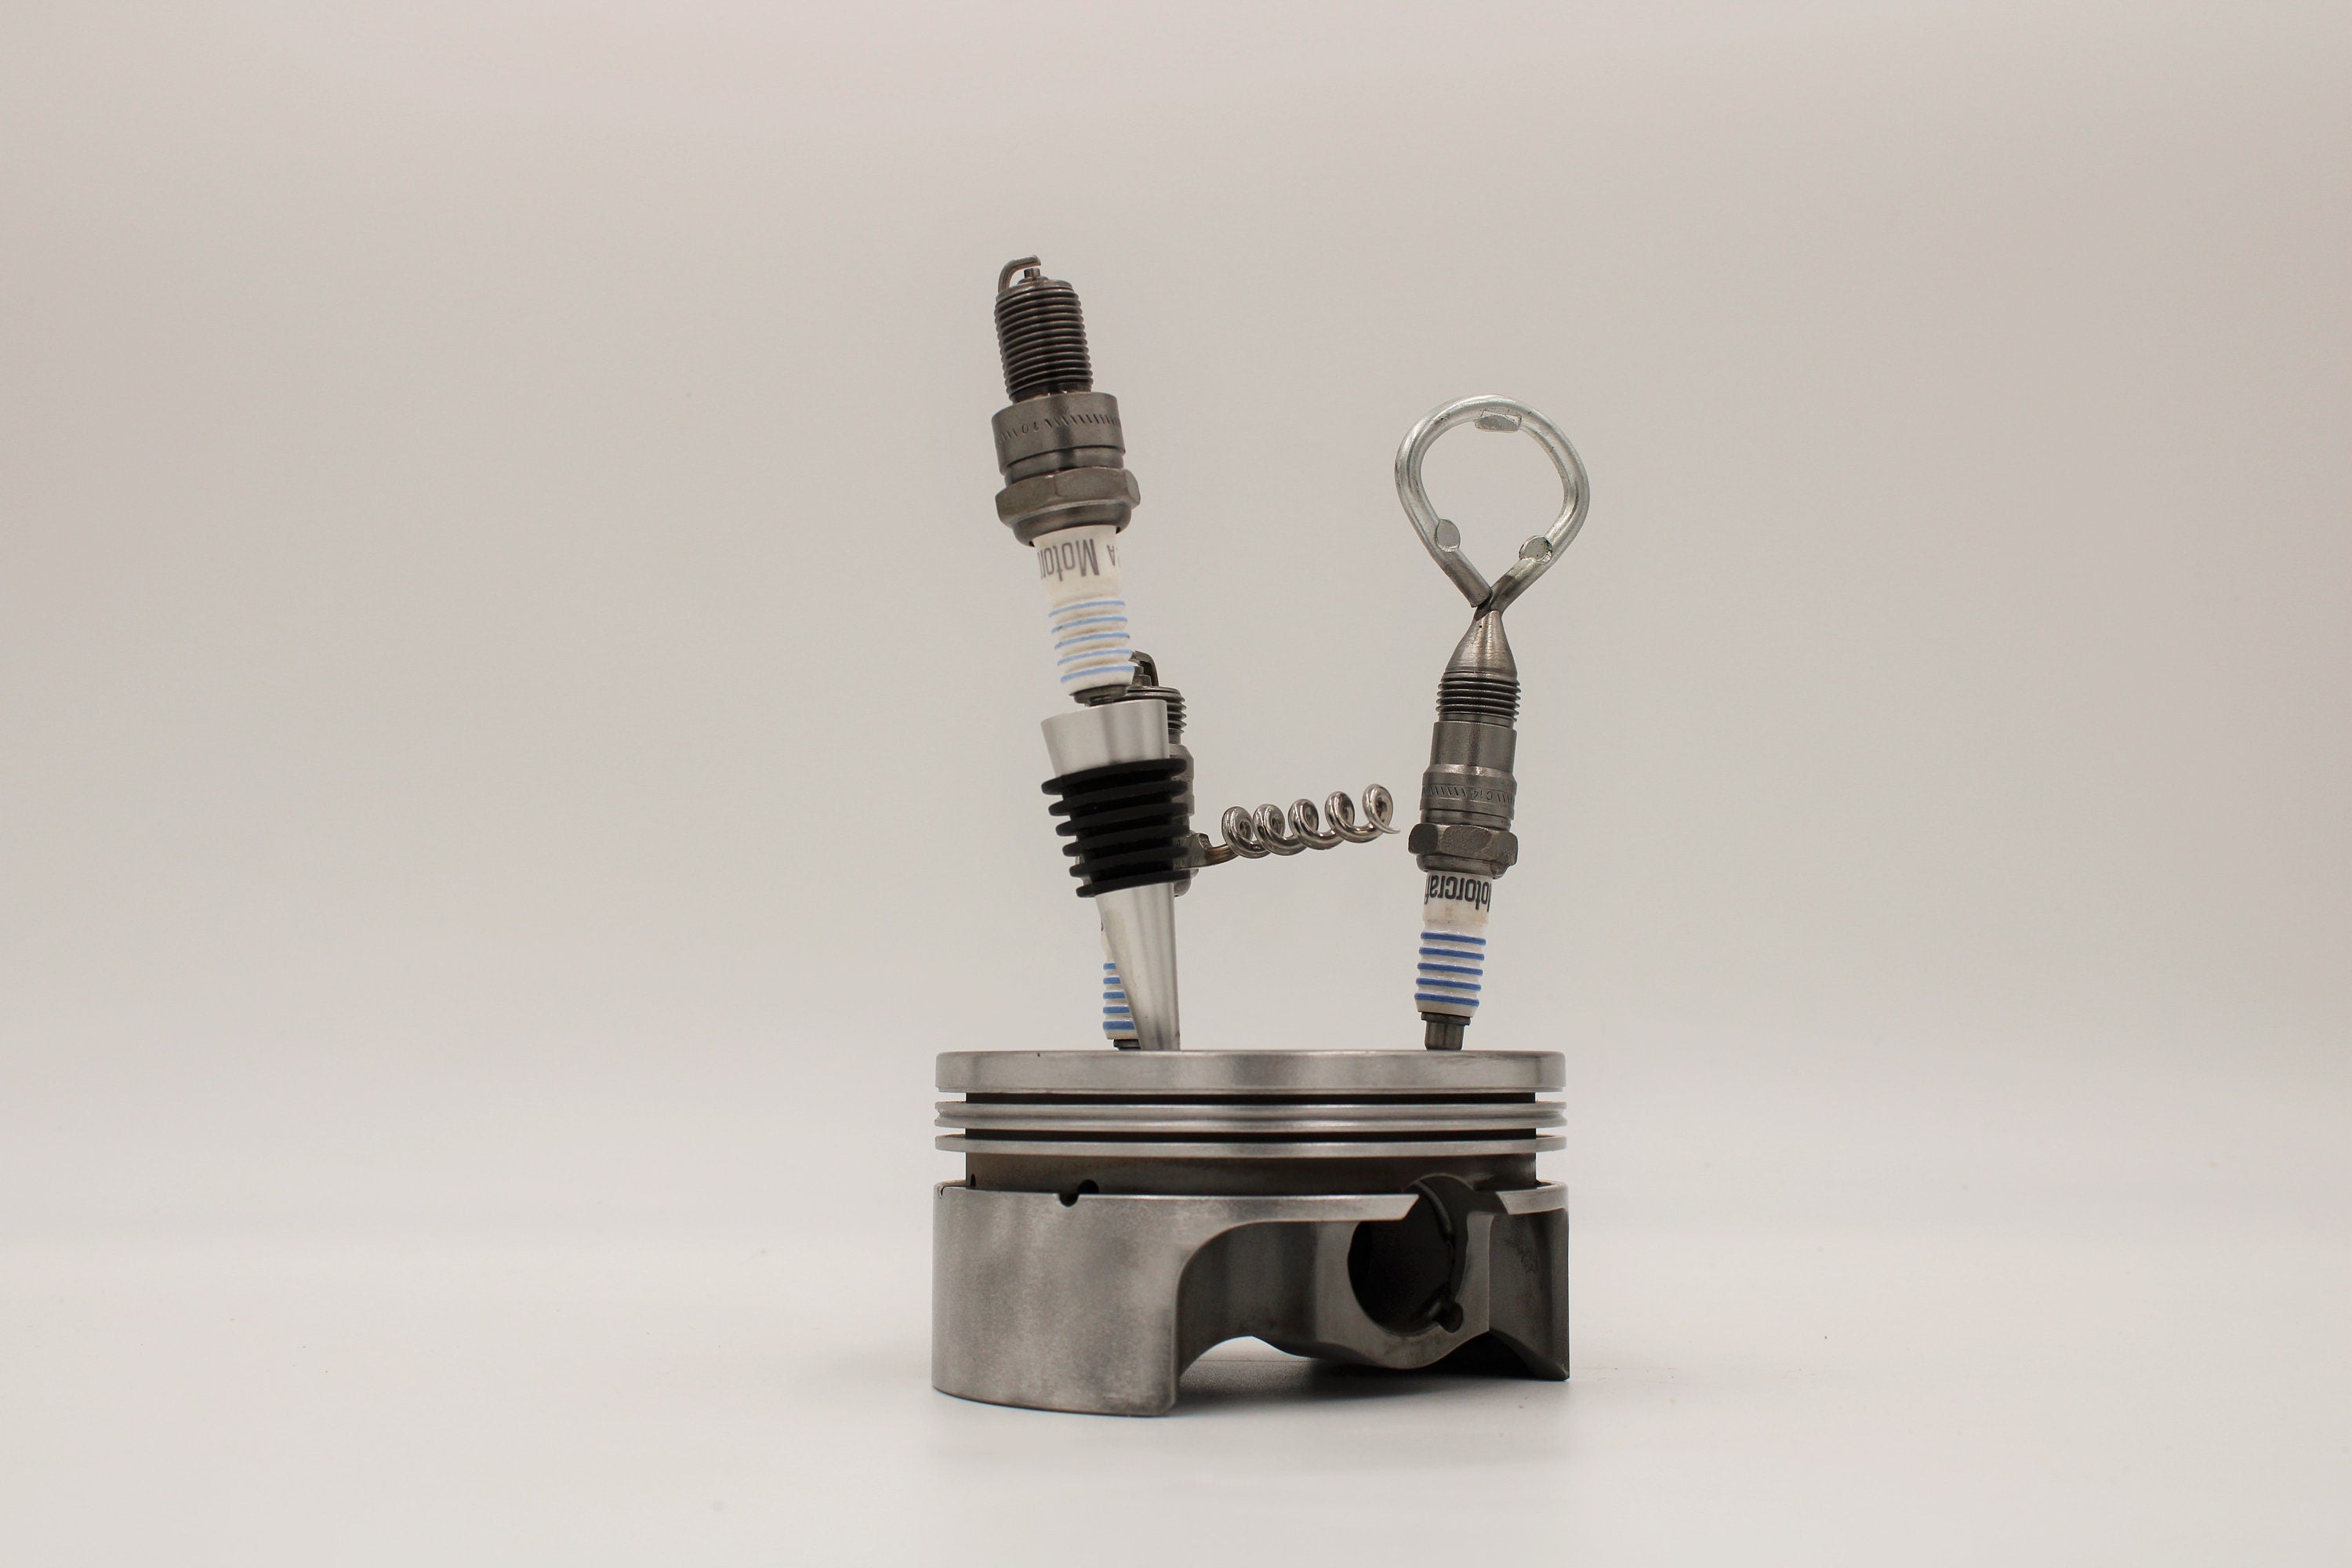 Spark plug bar set including a wine stopper, corkscrew and bottle opener, all made from car spark plugs and in a car piston holder.